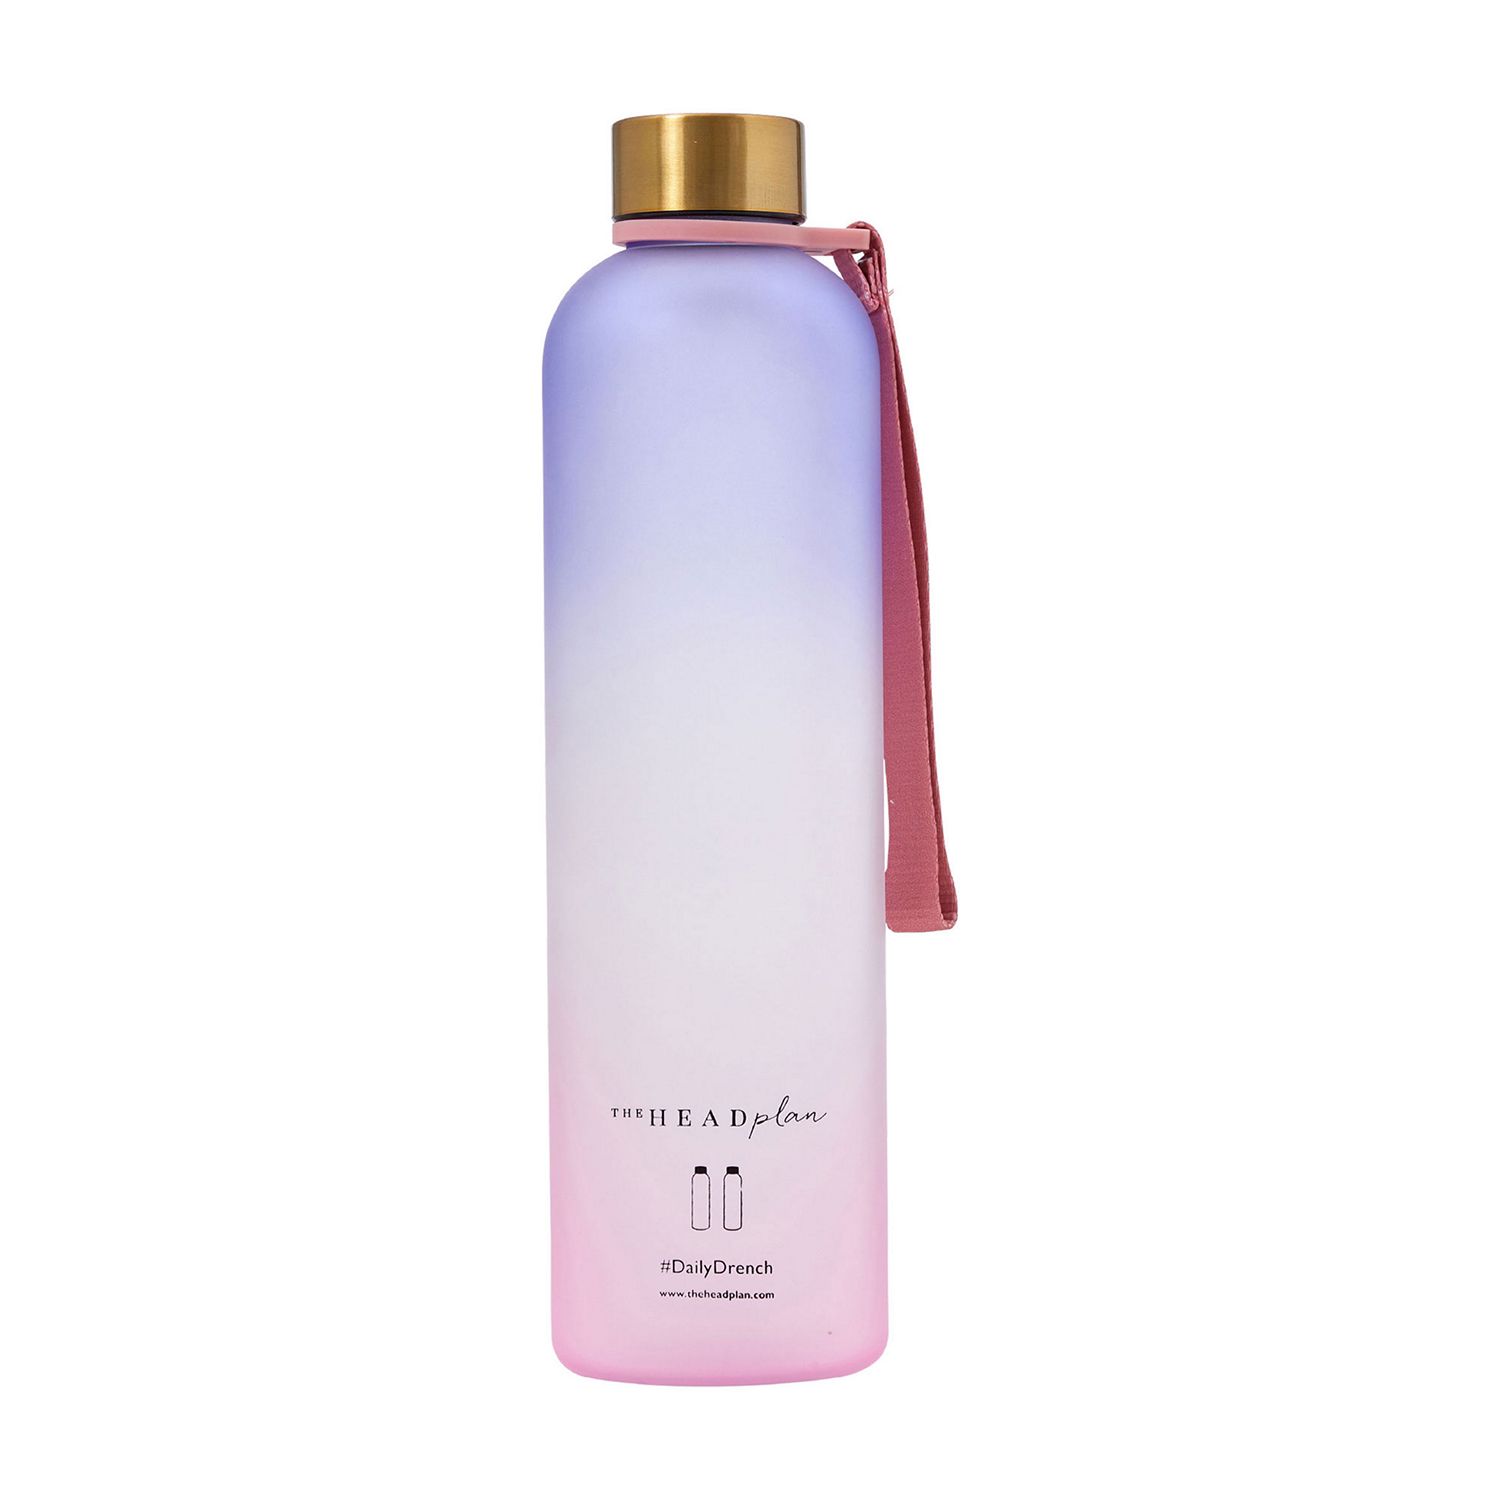 Daily Drench Bottle | Brown Thomas (IE)